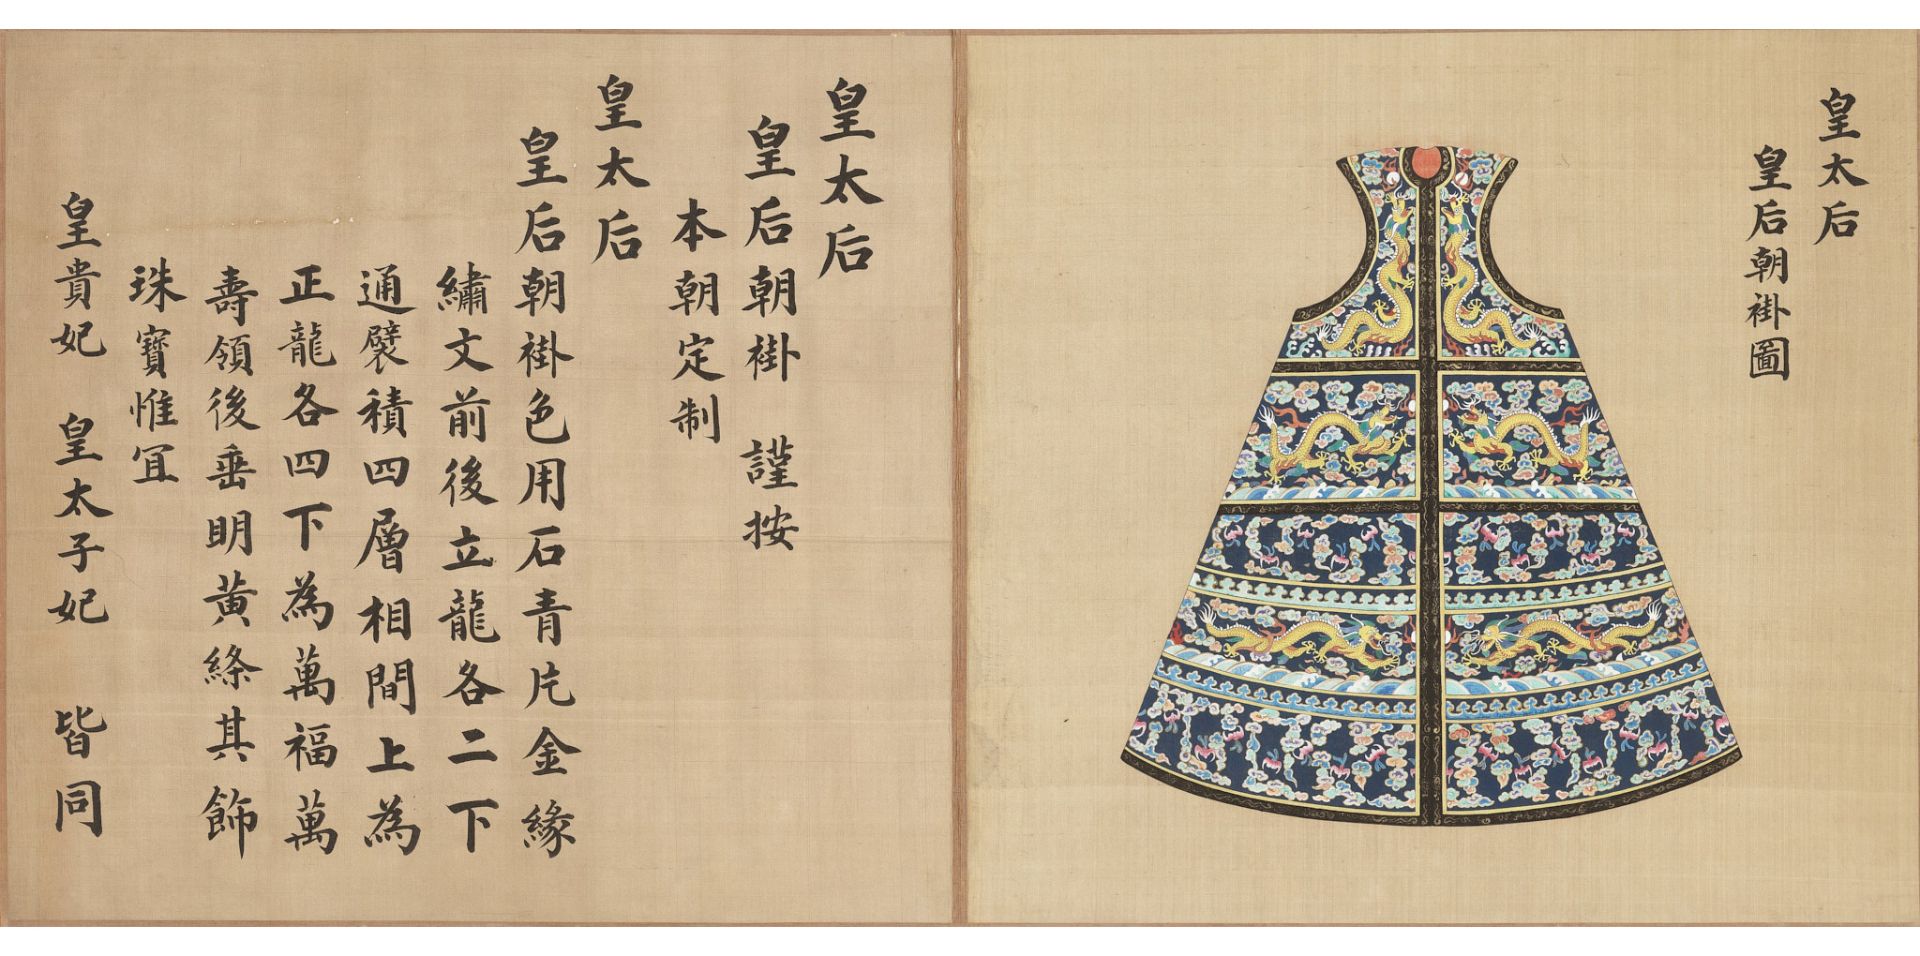 A RARE AND IMPORTANT ALBUM LEAF FROM THE HUANGCHAO LIQI TUSHI WITH AN IMPERIALLY INSCRIBED SILK PAIN